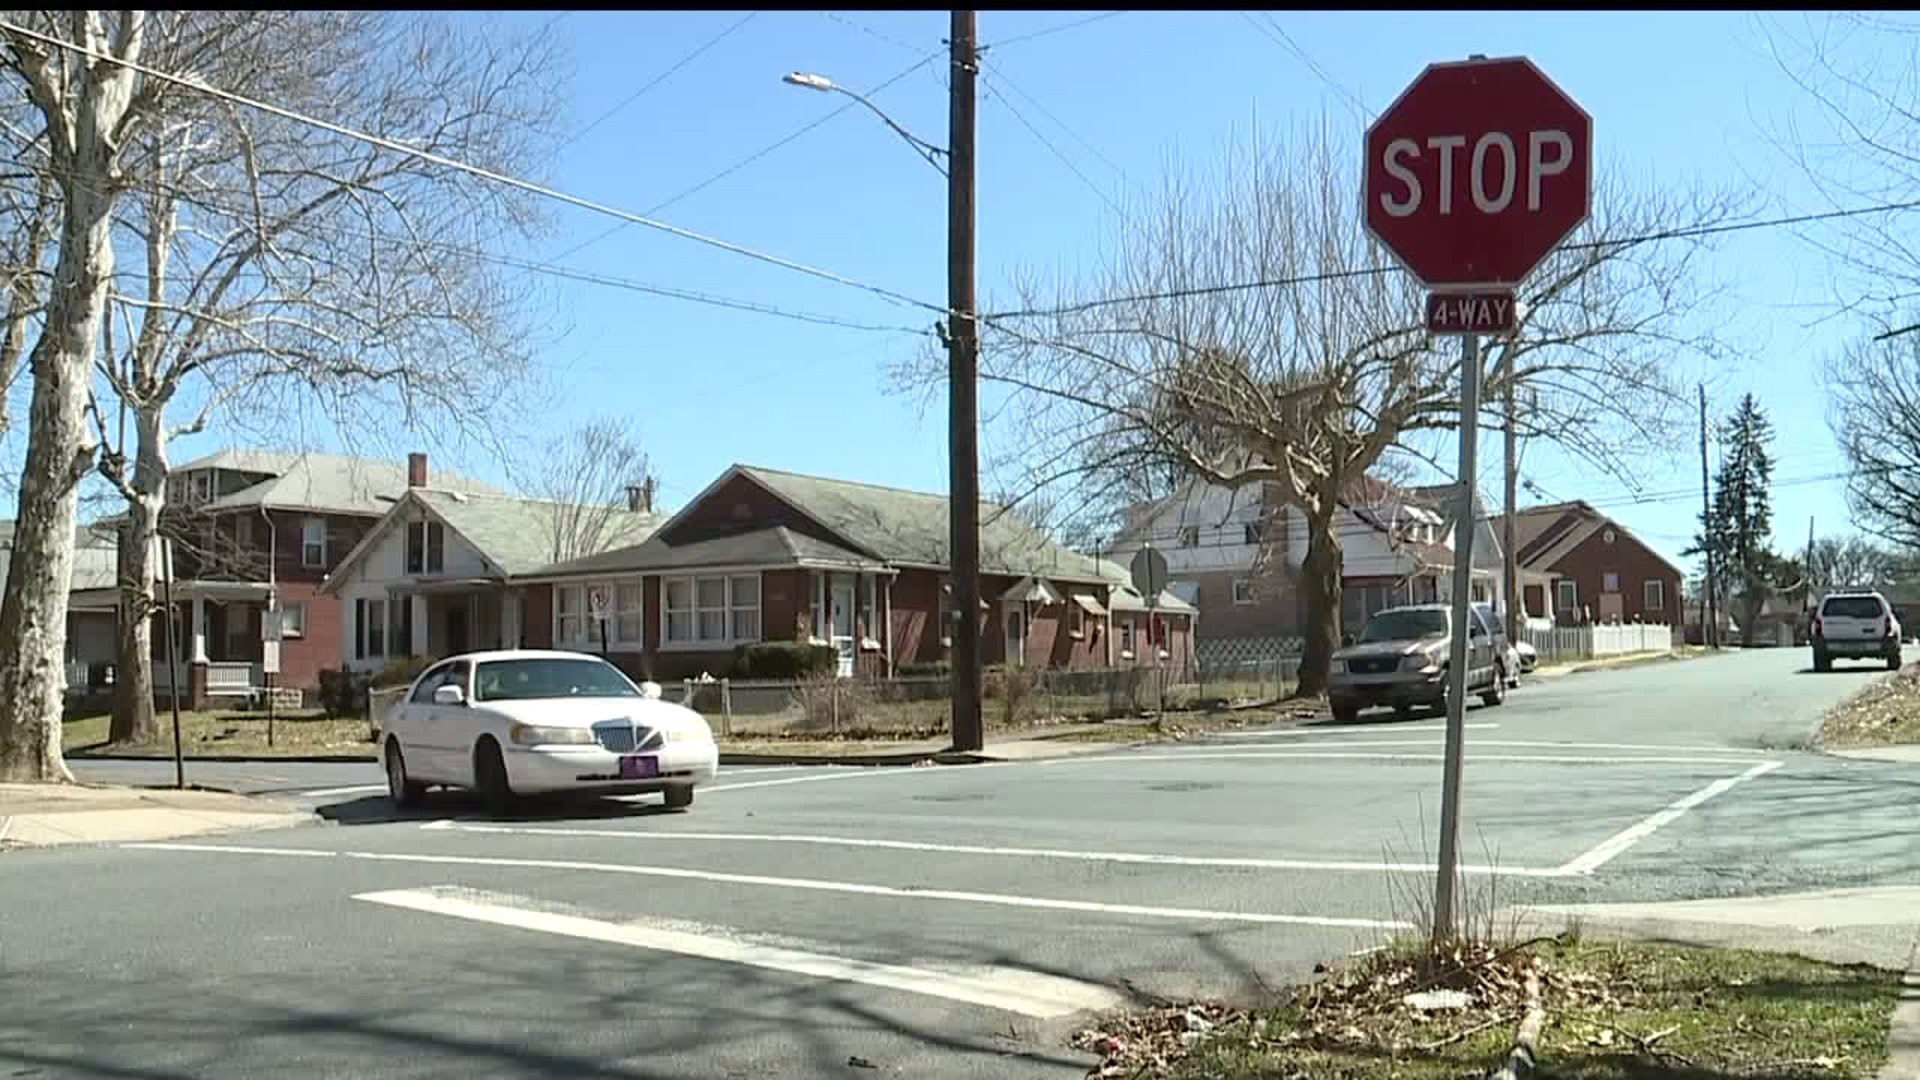 Harrisburg attempted child abduction